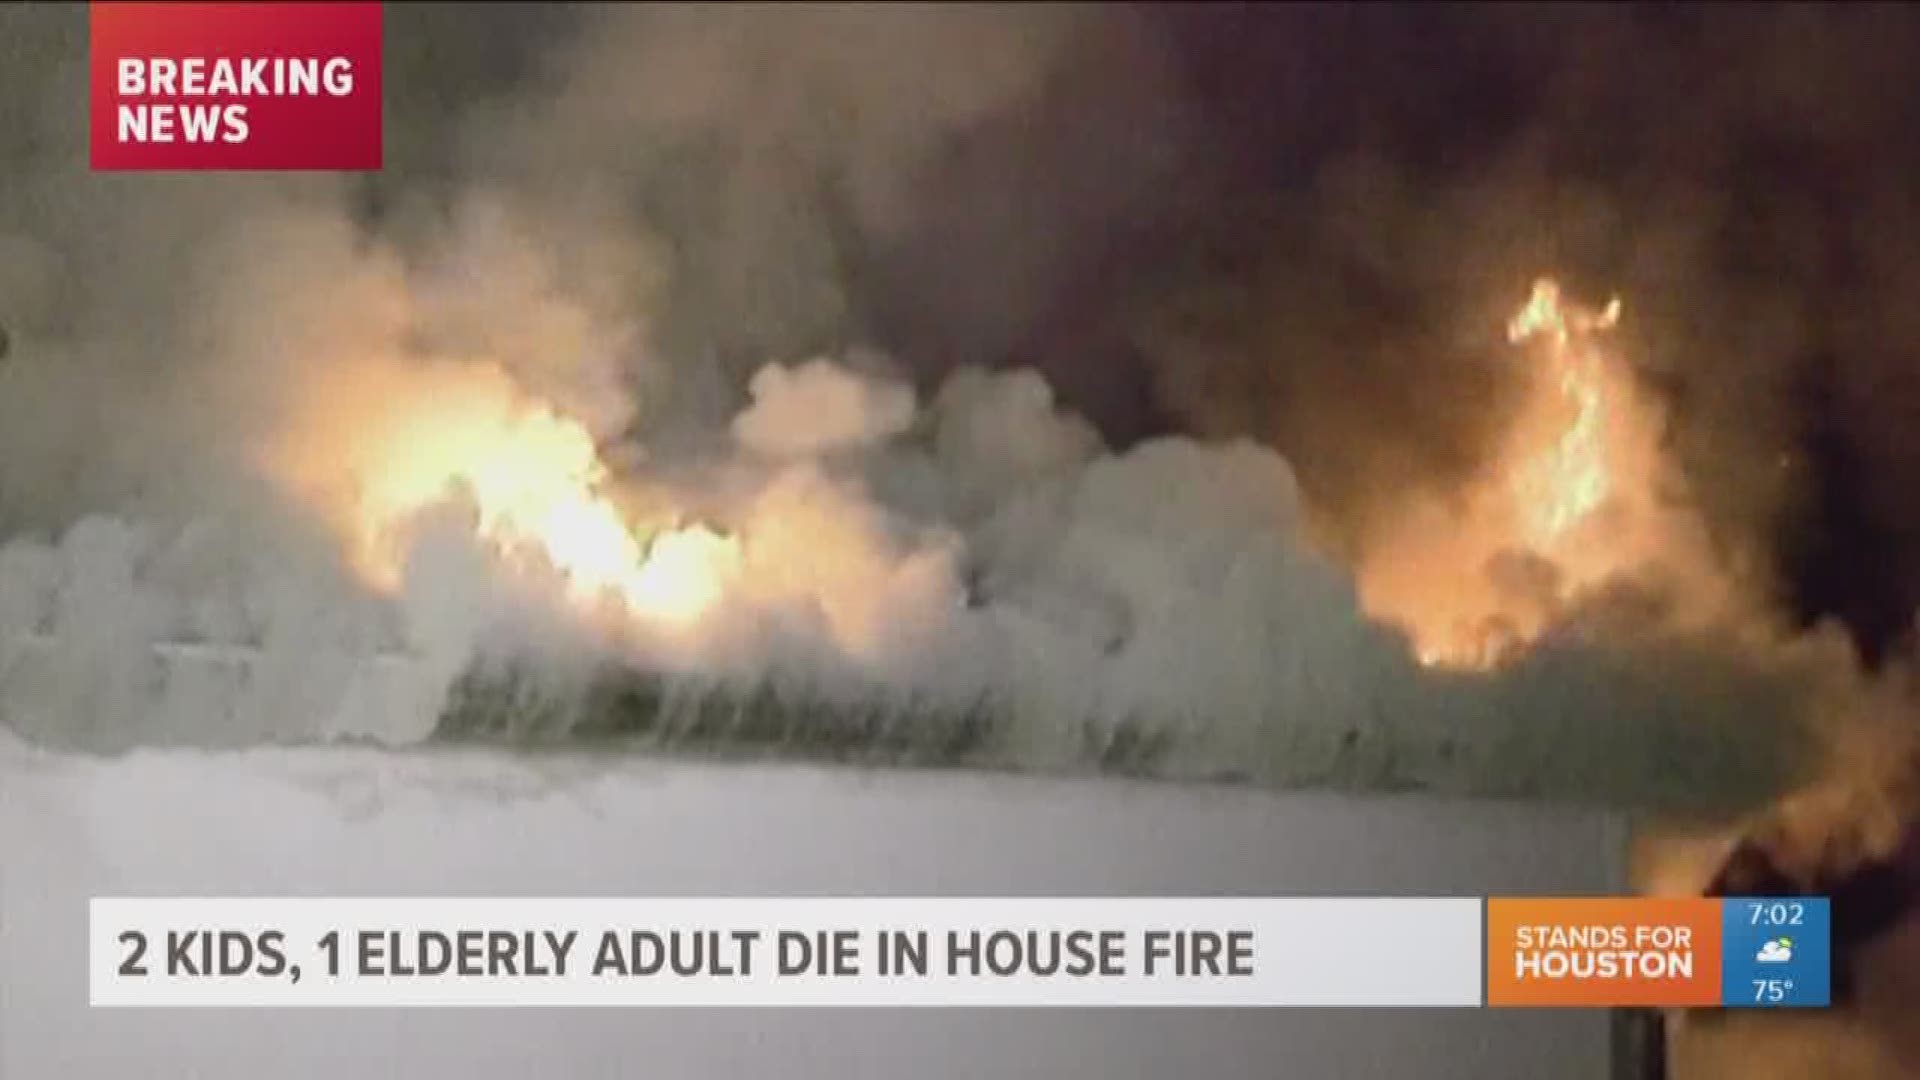 Two young children and a grandmother lost their lives in a house fire early Saturday morning. 